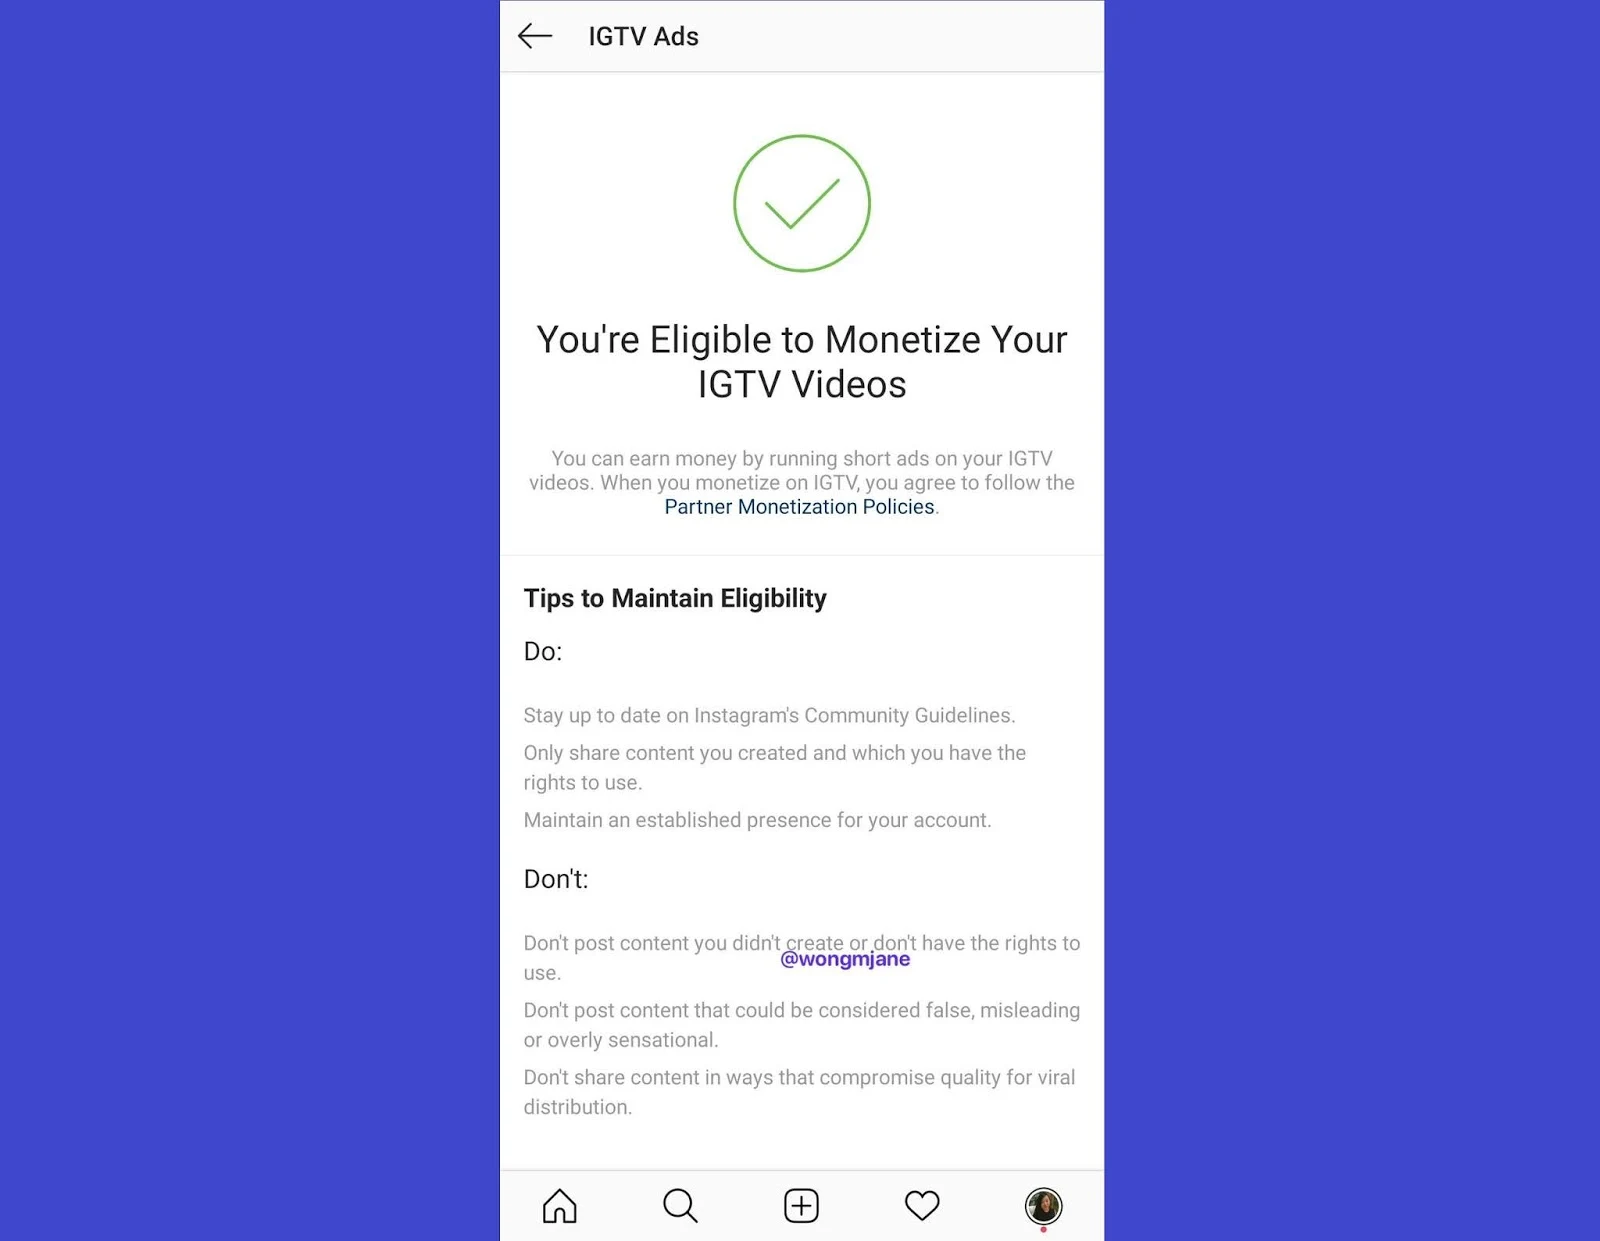 Instagram lays out guideline for maintaining IGTV Ads eligibility, stating creators should: not infringe copyright; not misinform, mislead, or overly-sensationalize; not compromise quality “for viral distribution”.